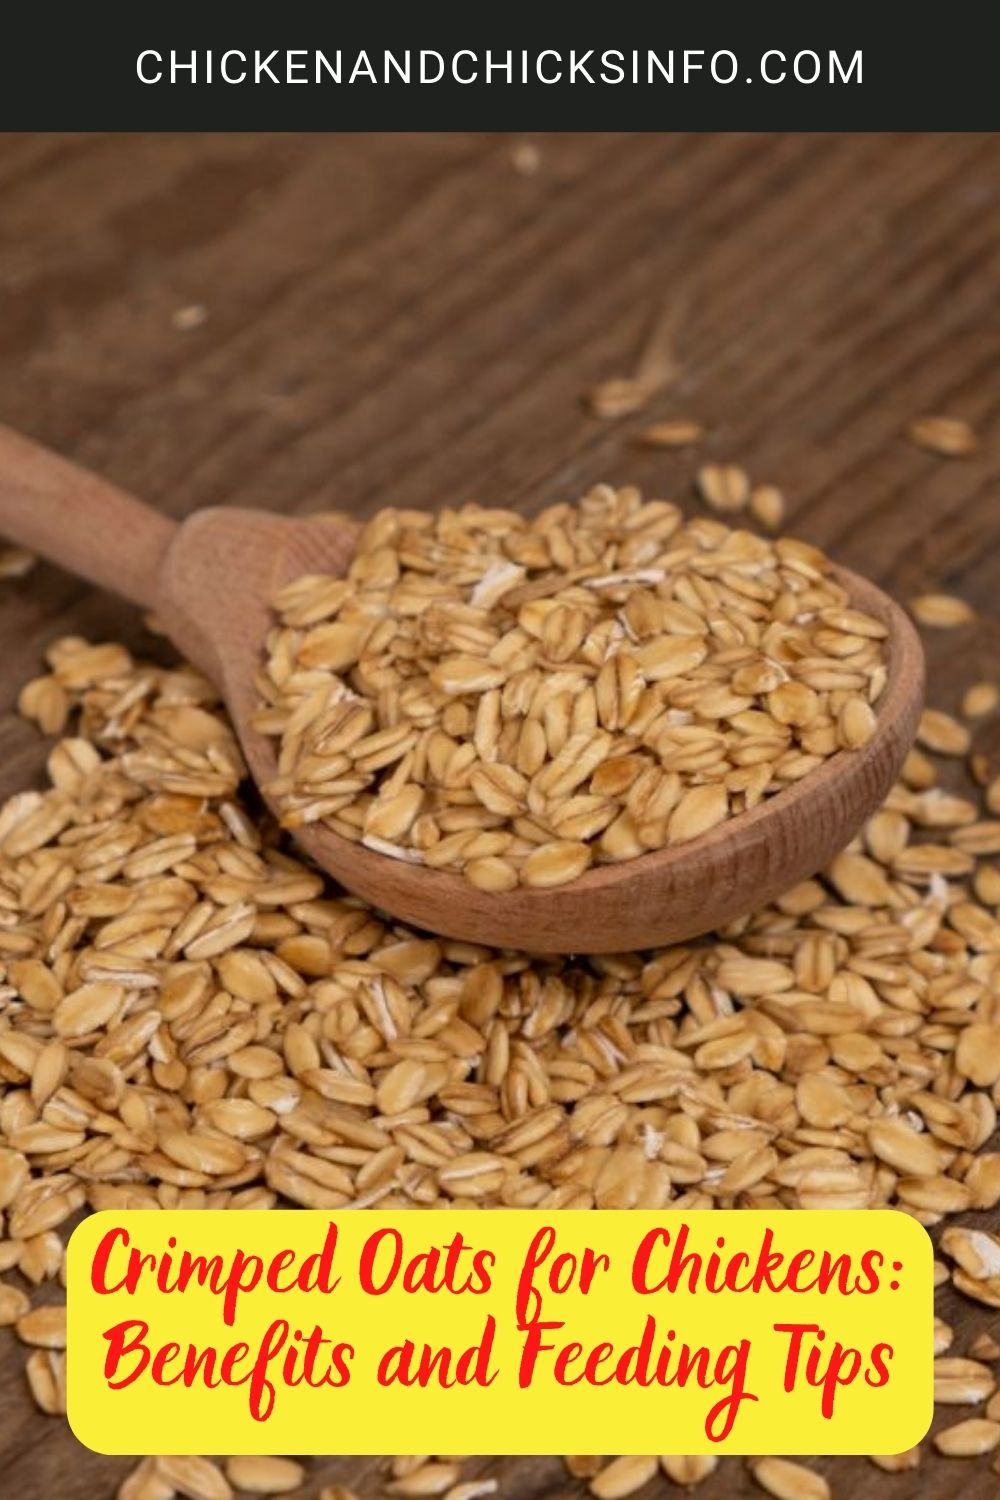 Crimped Oats for Chickens: Benefits and Feeding Tips poster.